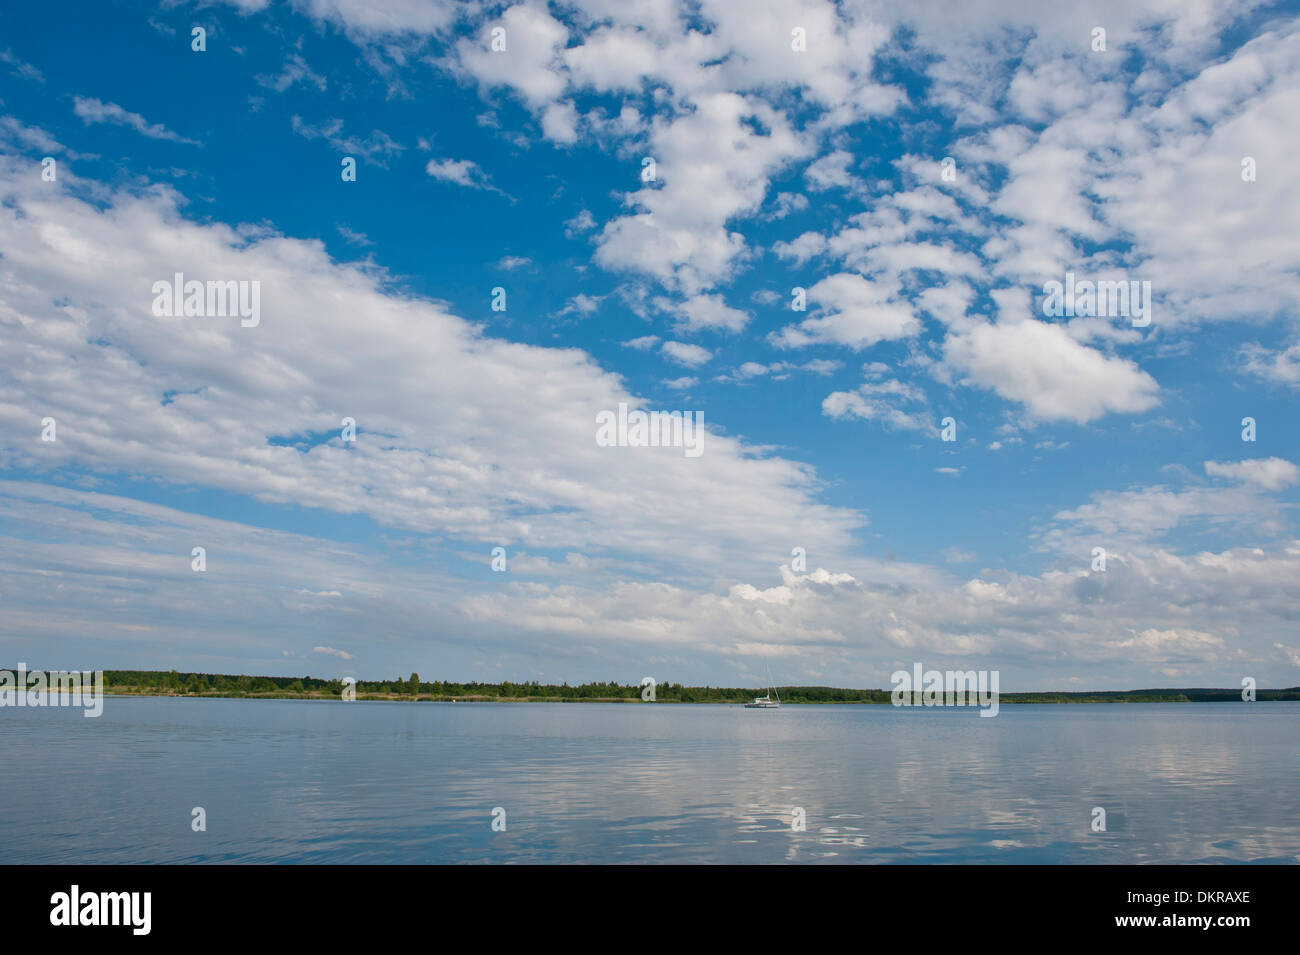 Leipzig, lake, Cospuden, Germany, Europe, Saxony, width, broadness, clouds Stock Photo